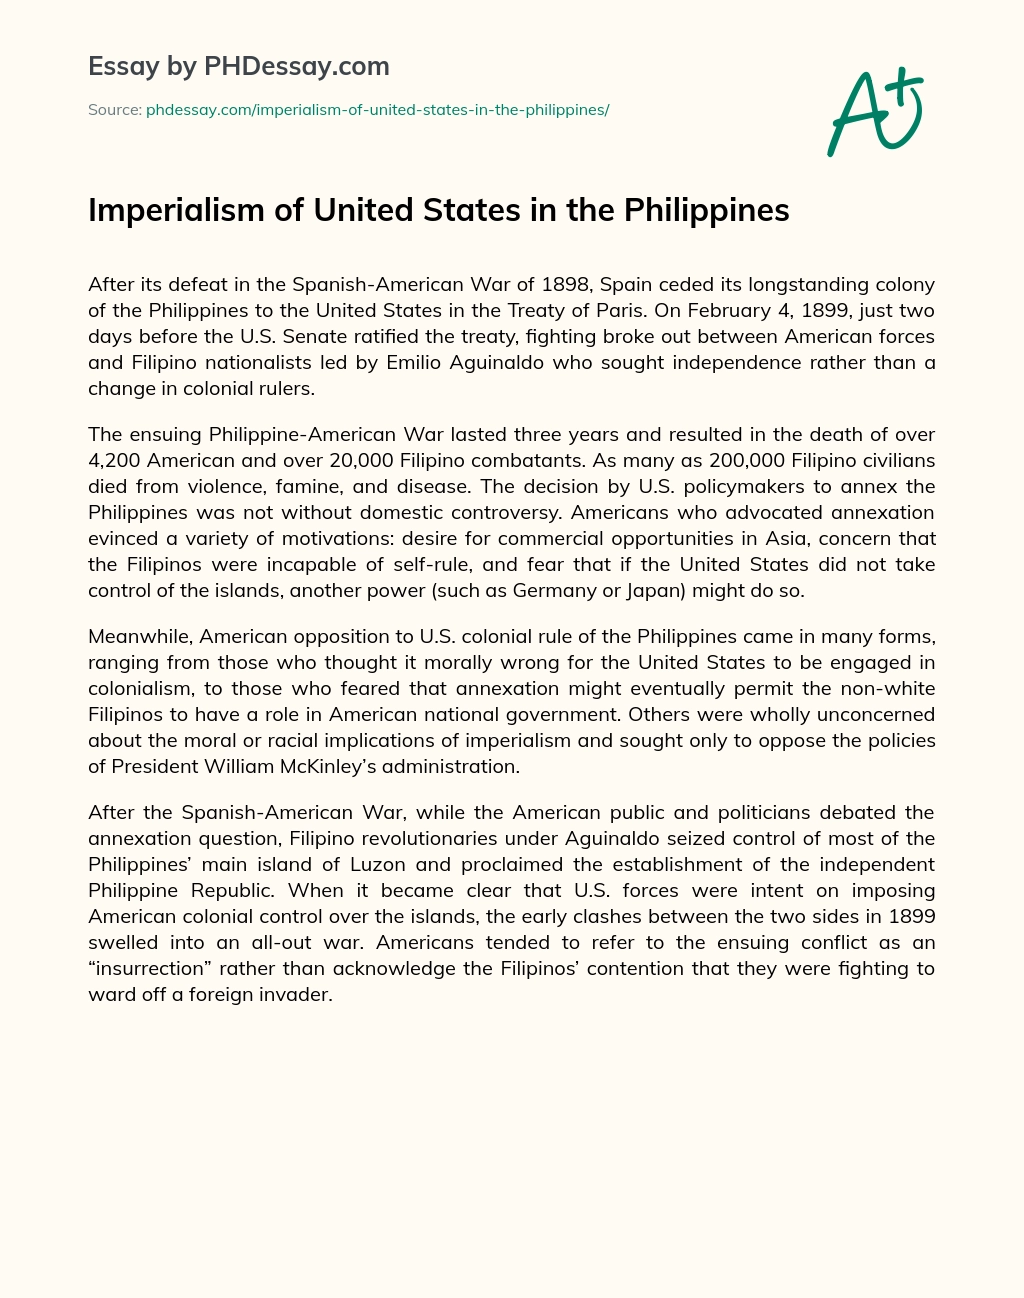 Imperialism of United States in the Philippines essay